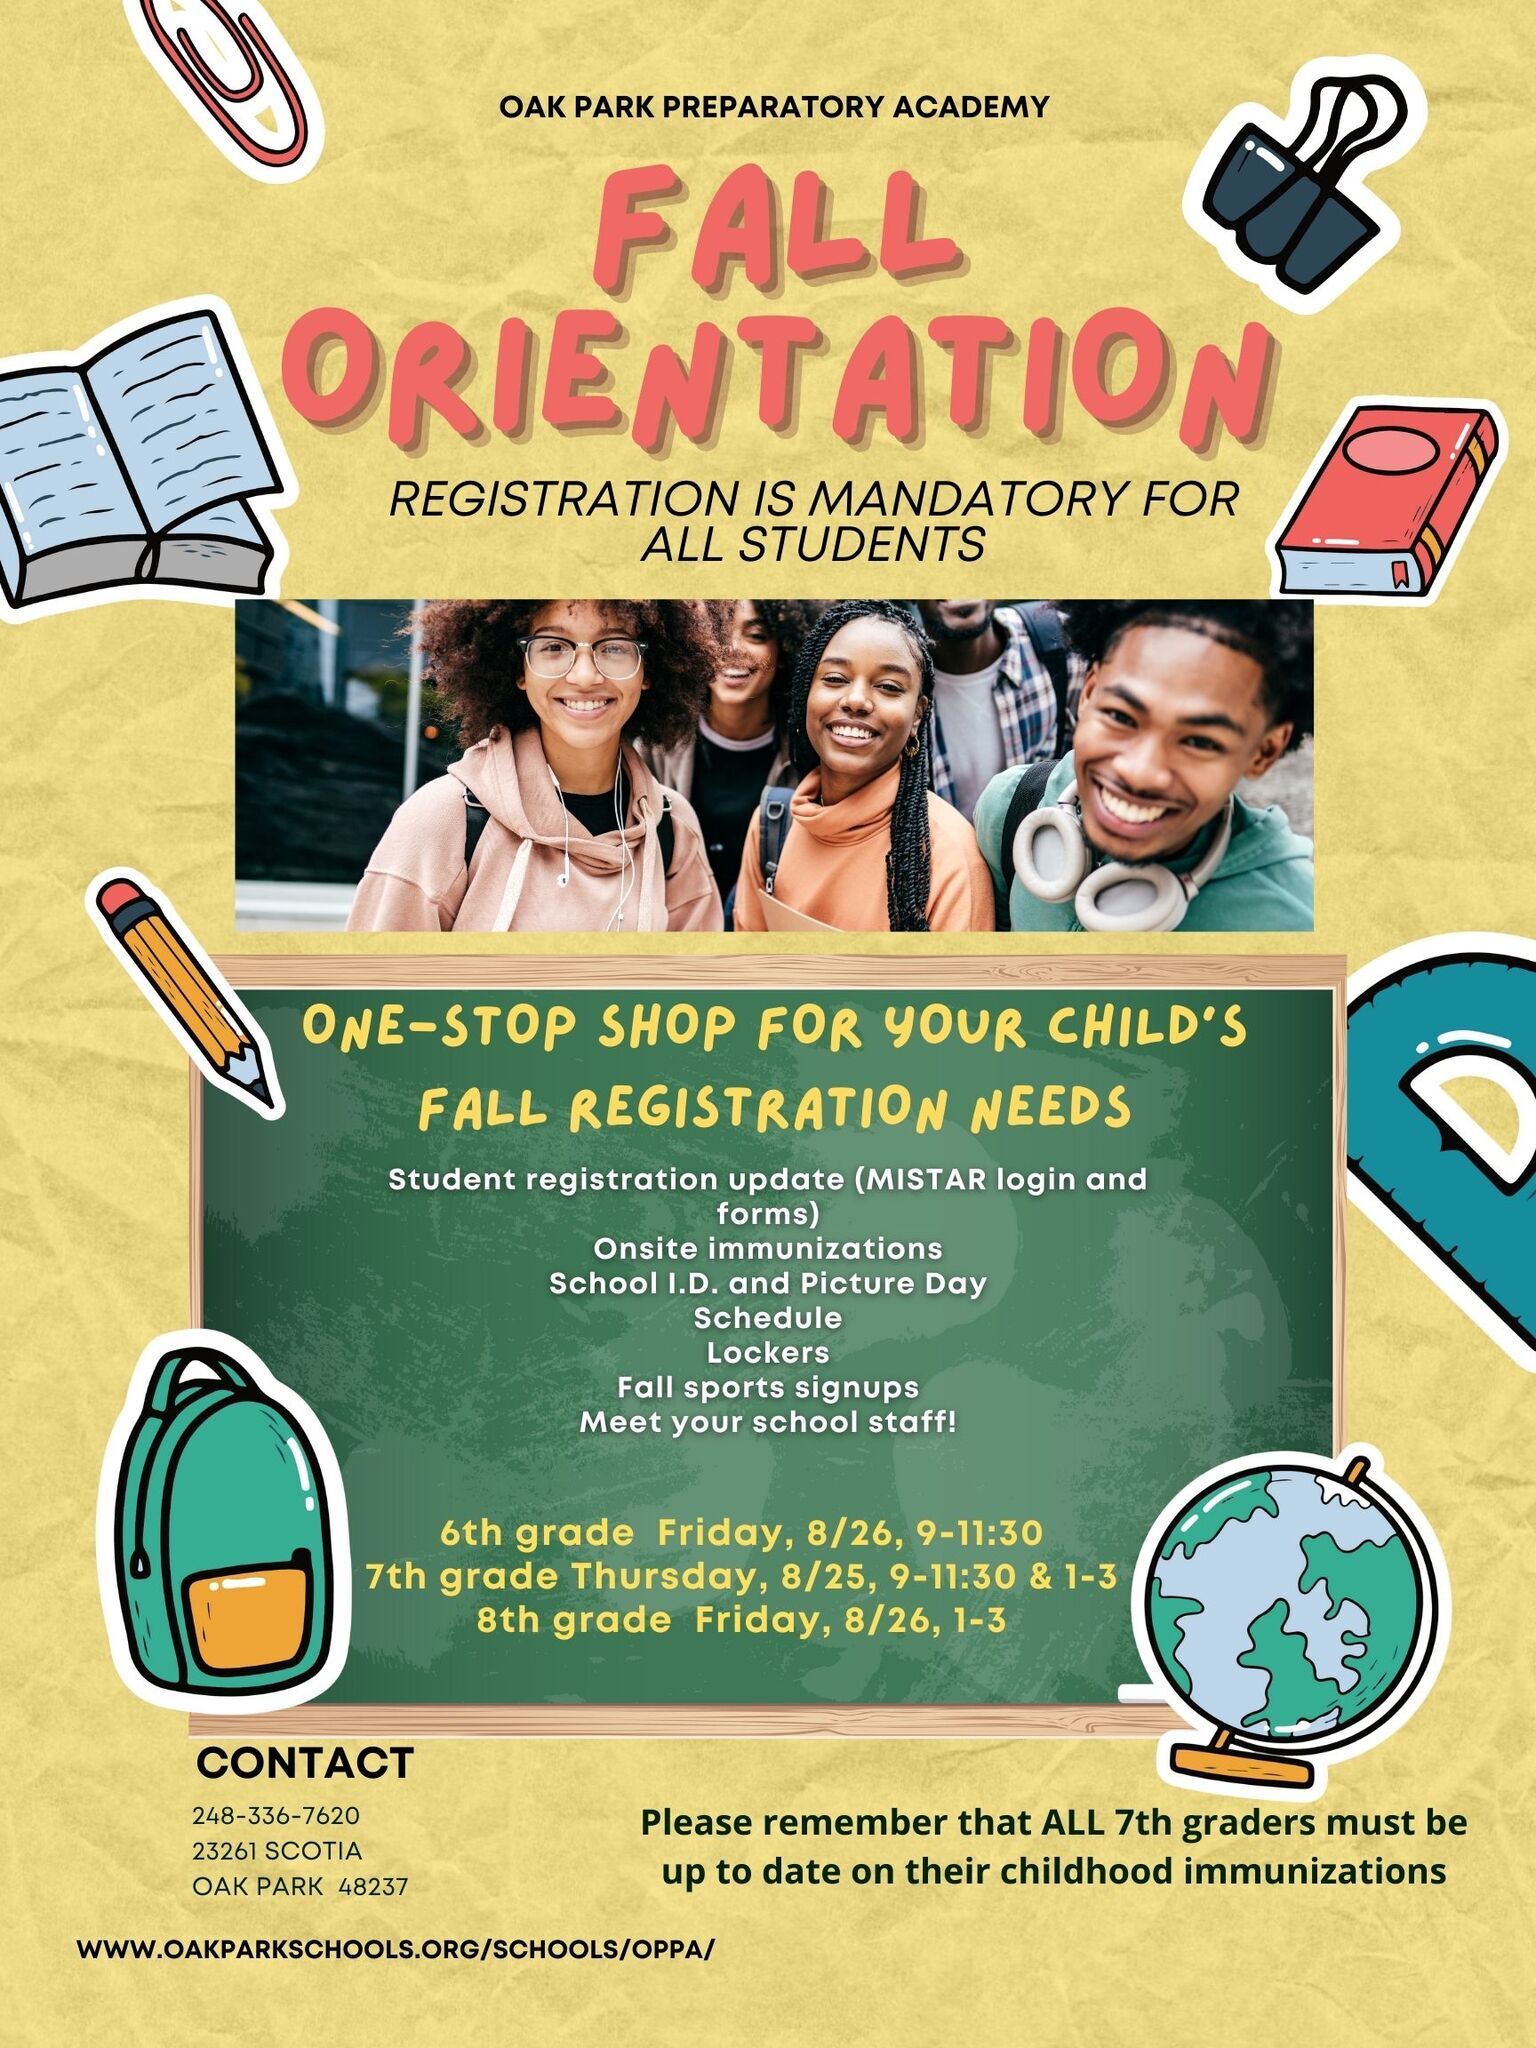 Fall Orientation August 25 and 26